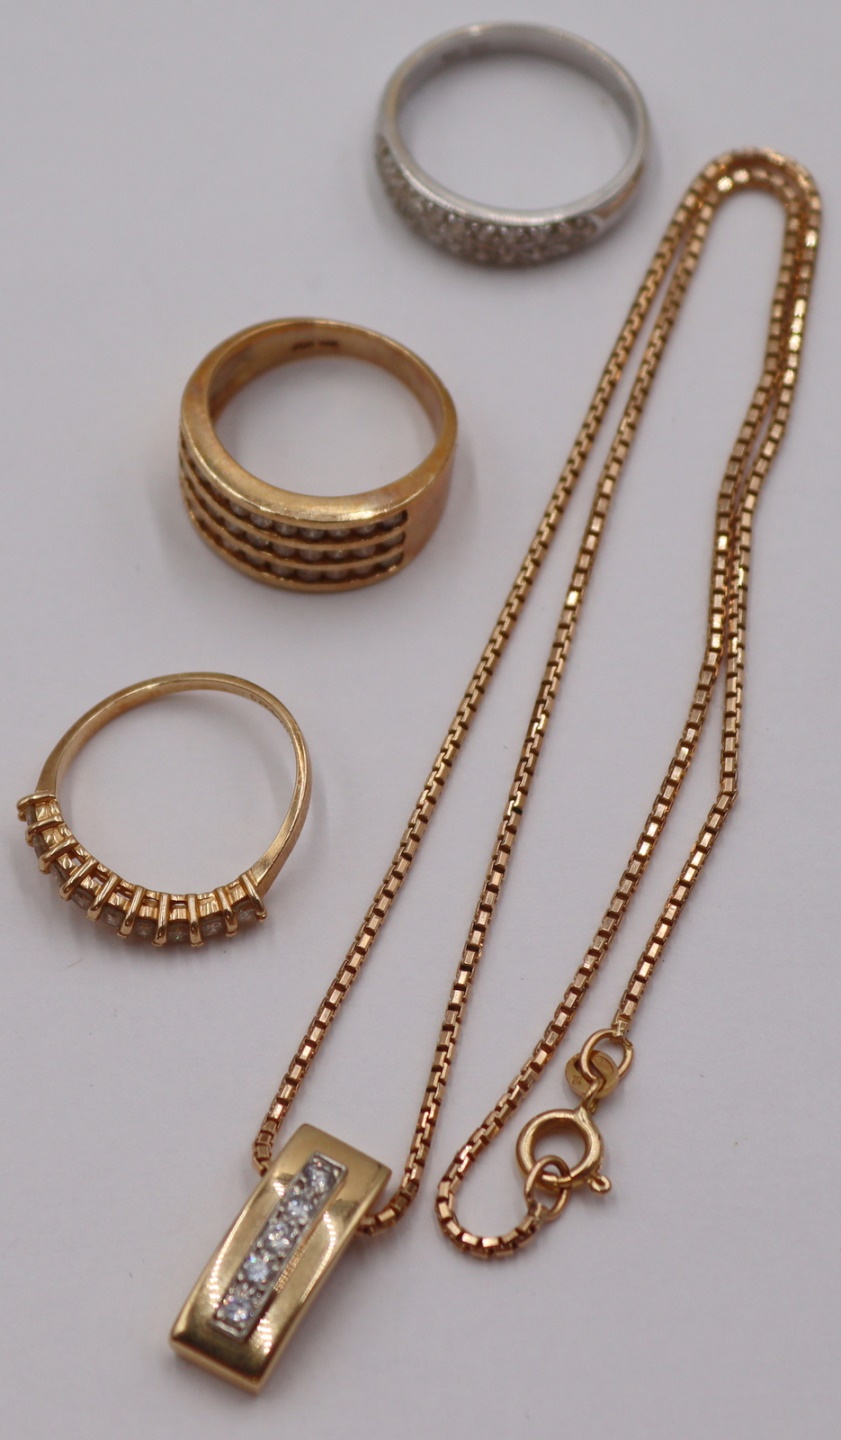 JEWELRY. ASSORTED GROUPING OF GOLD